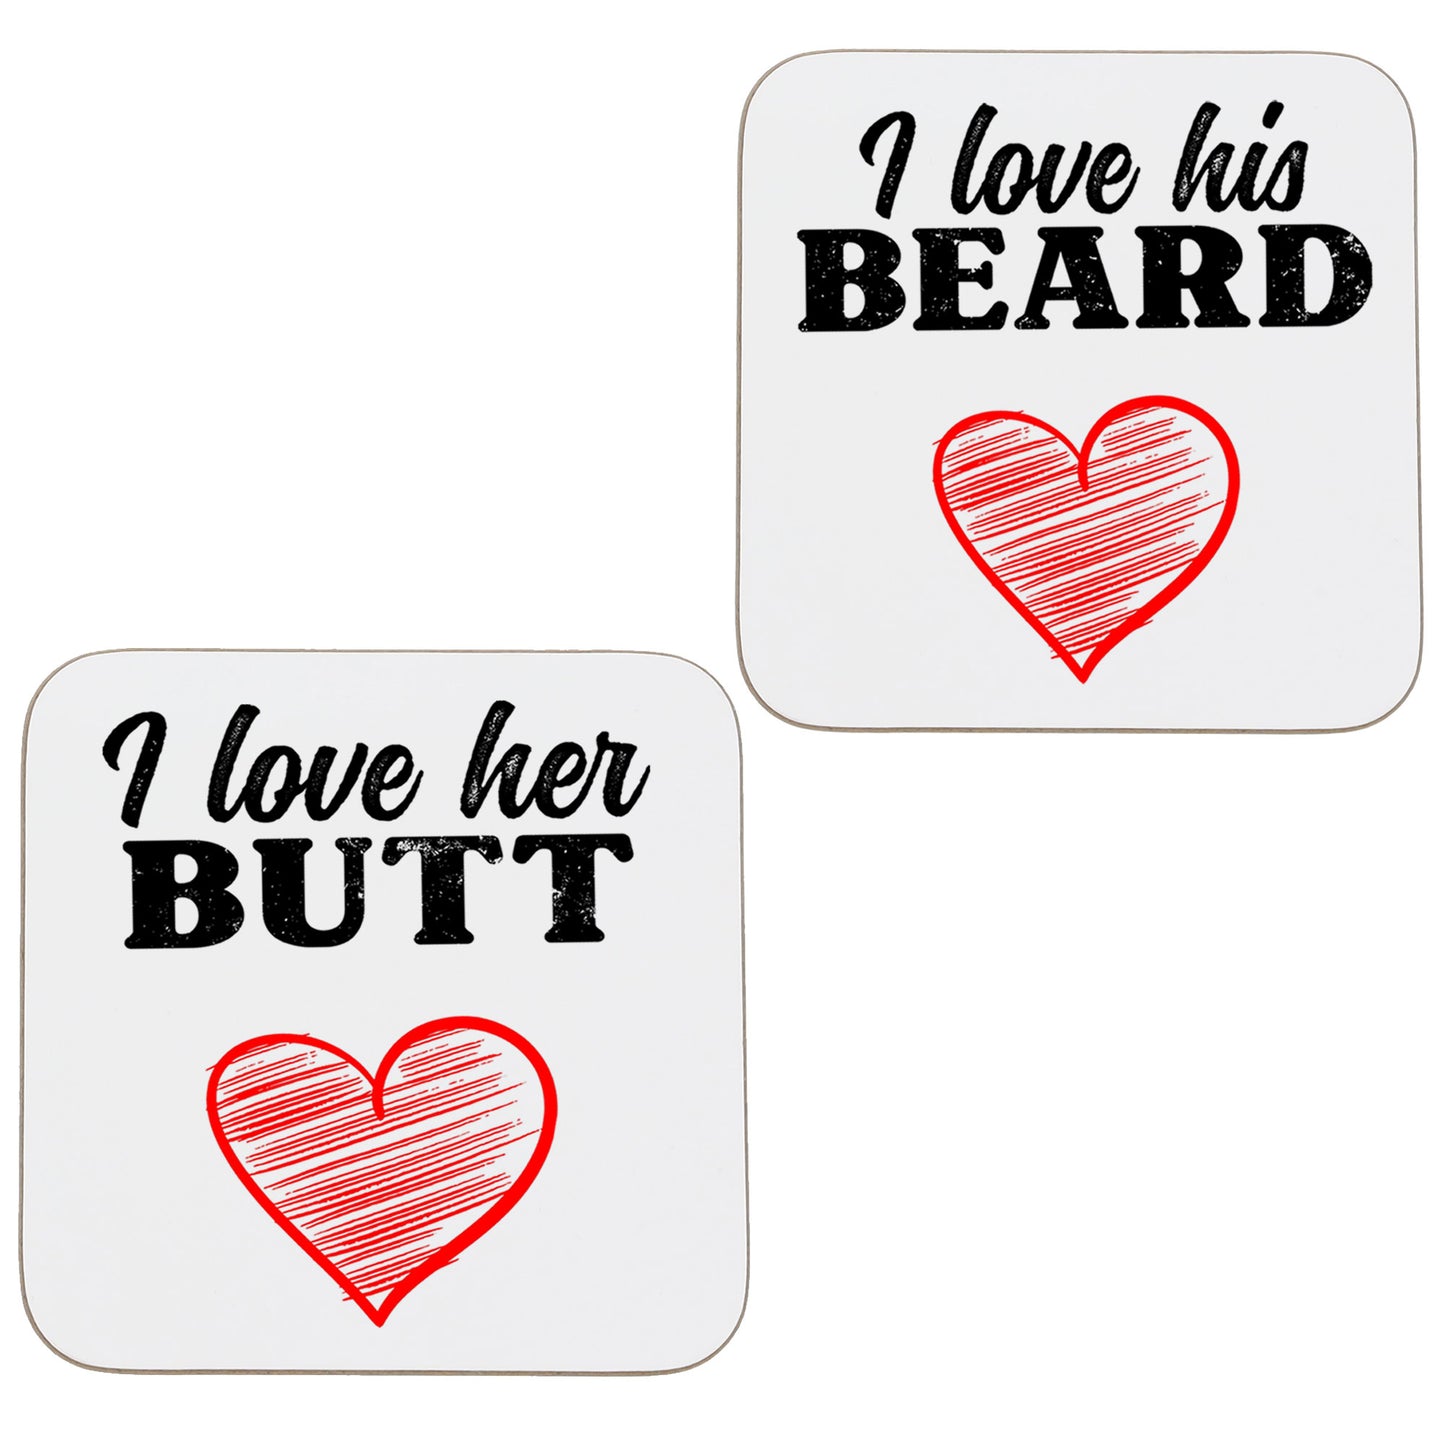 I Love His Beard / Her Butt Mug and/or Coaster Gift  - Always Looking Good - Set Of 2 Coasters Only  